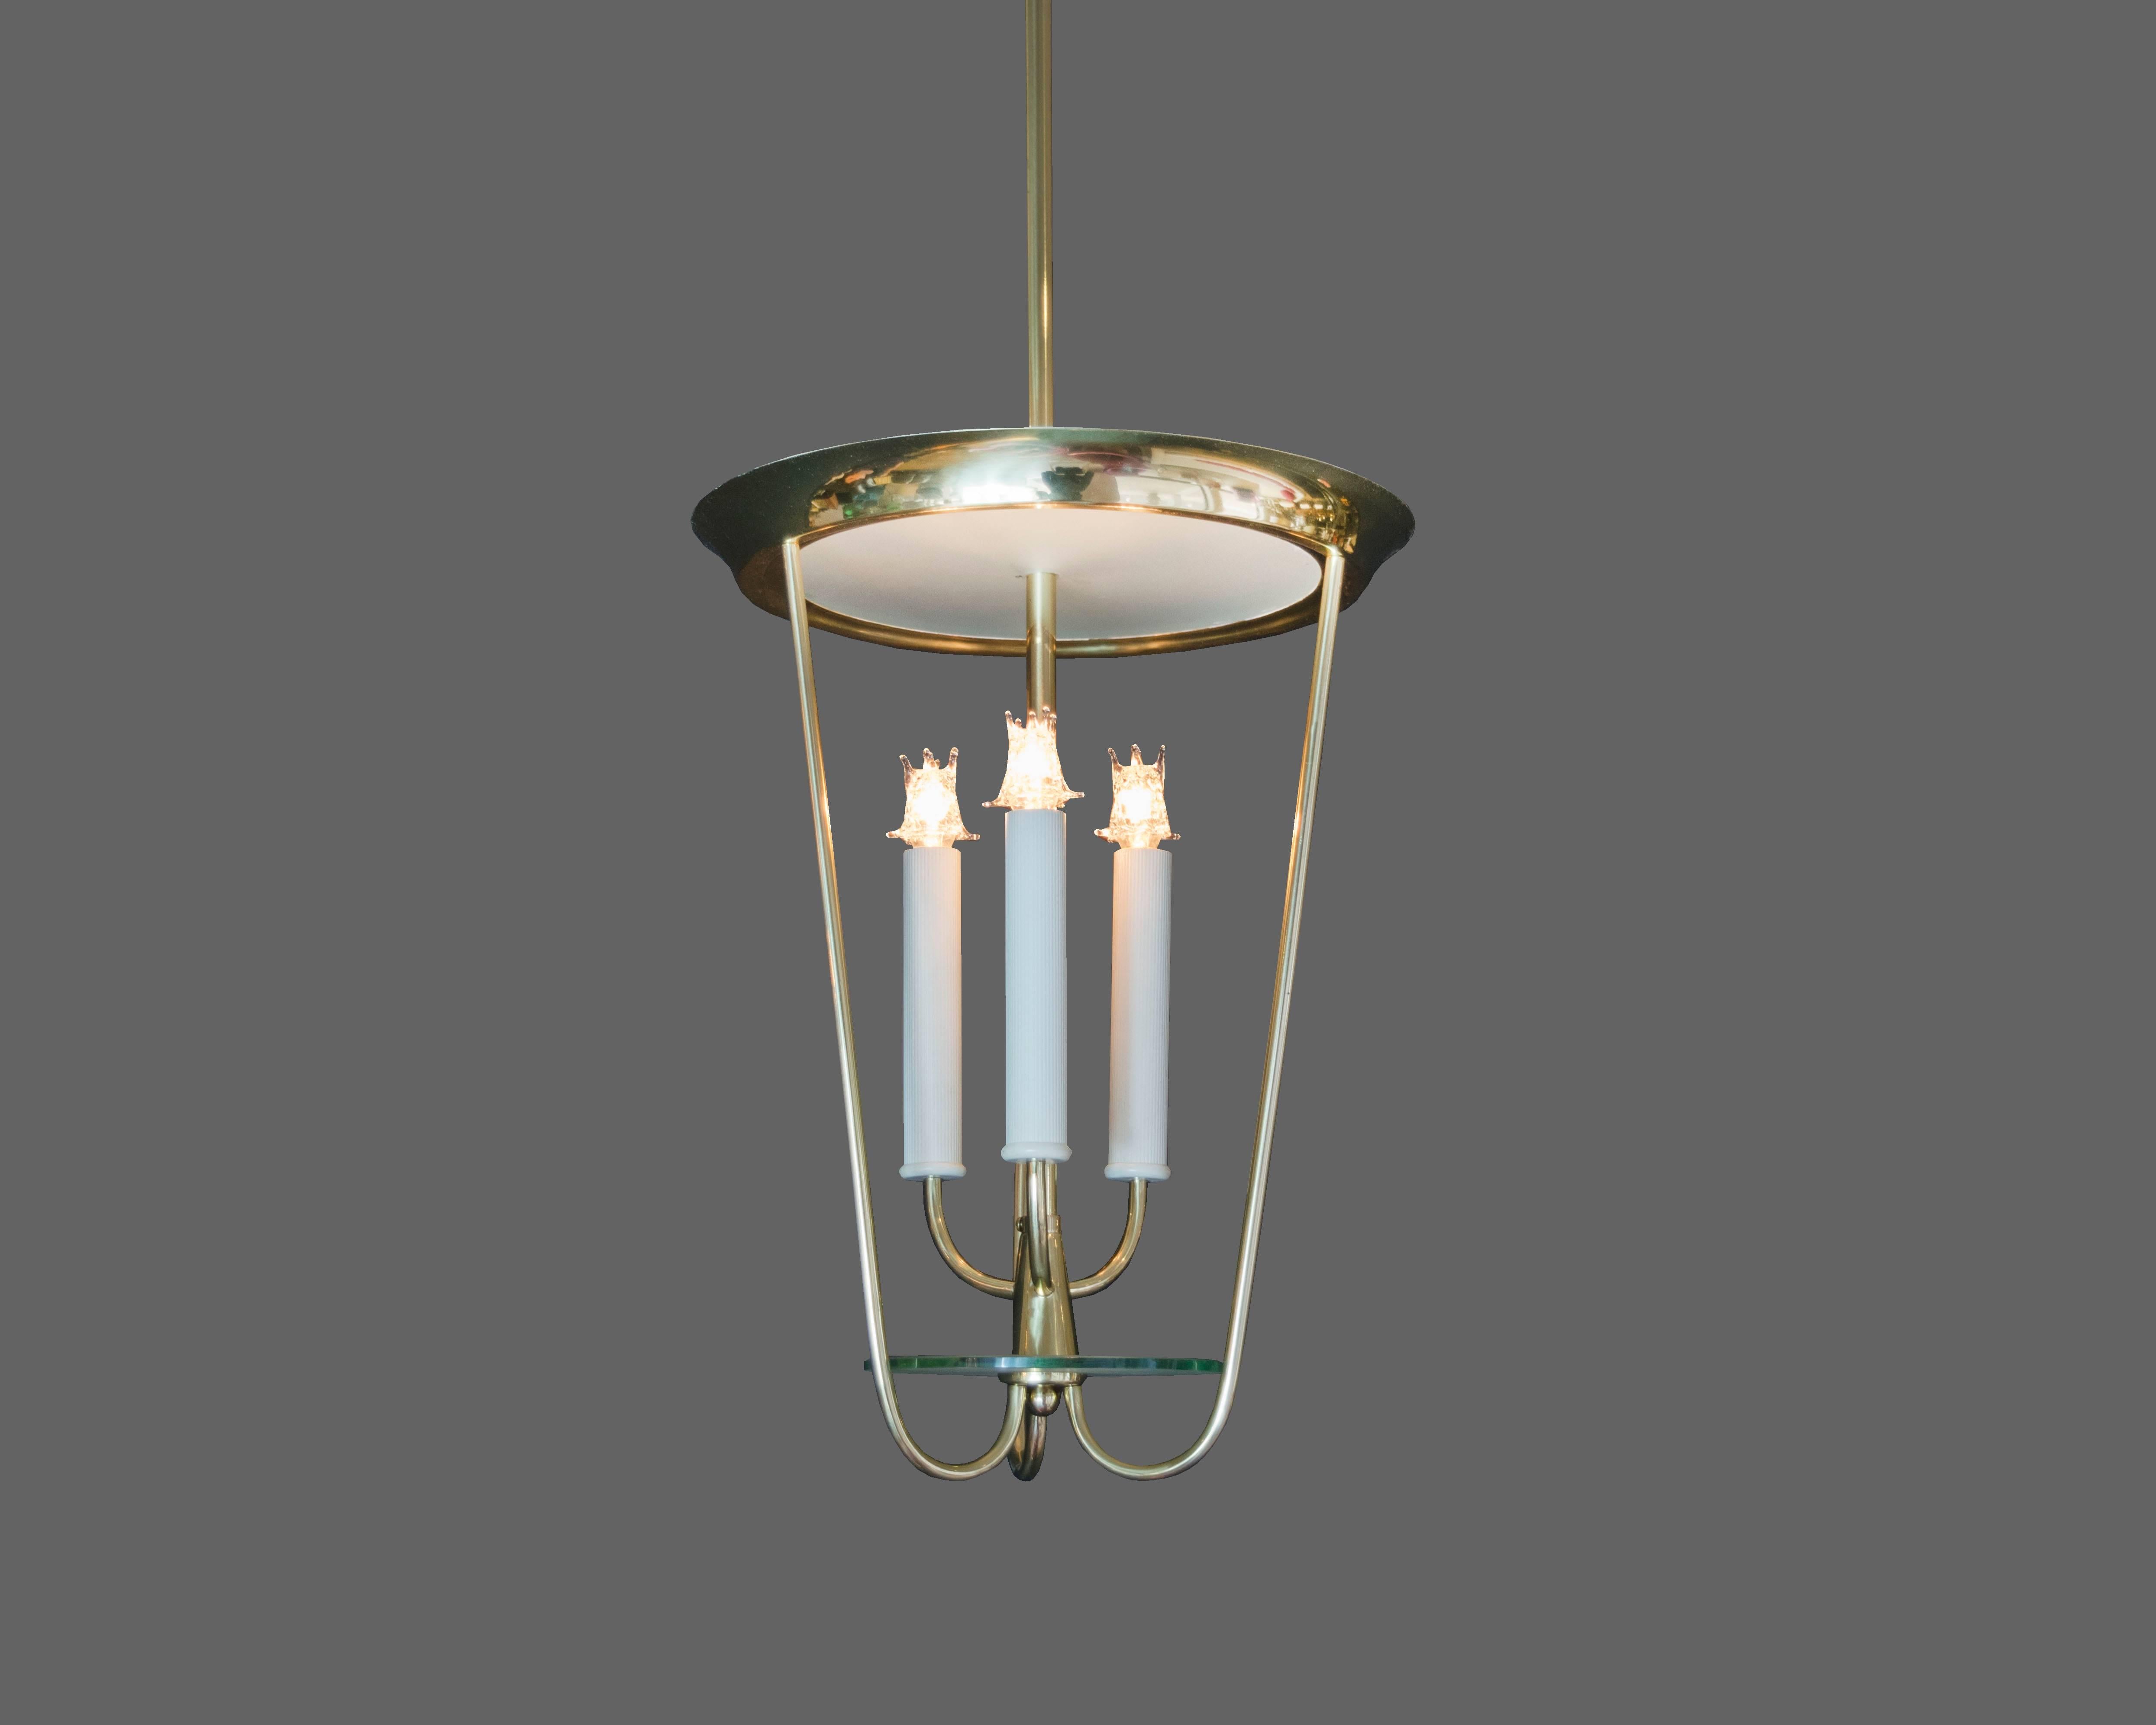 Elegant lantern pendant in the style of Fontana Arte made in Italy in the 1950s. This is truly an exceptional piece.